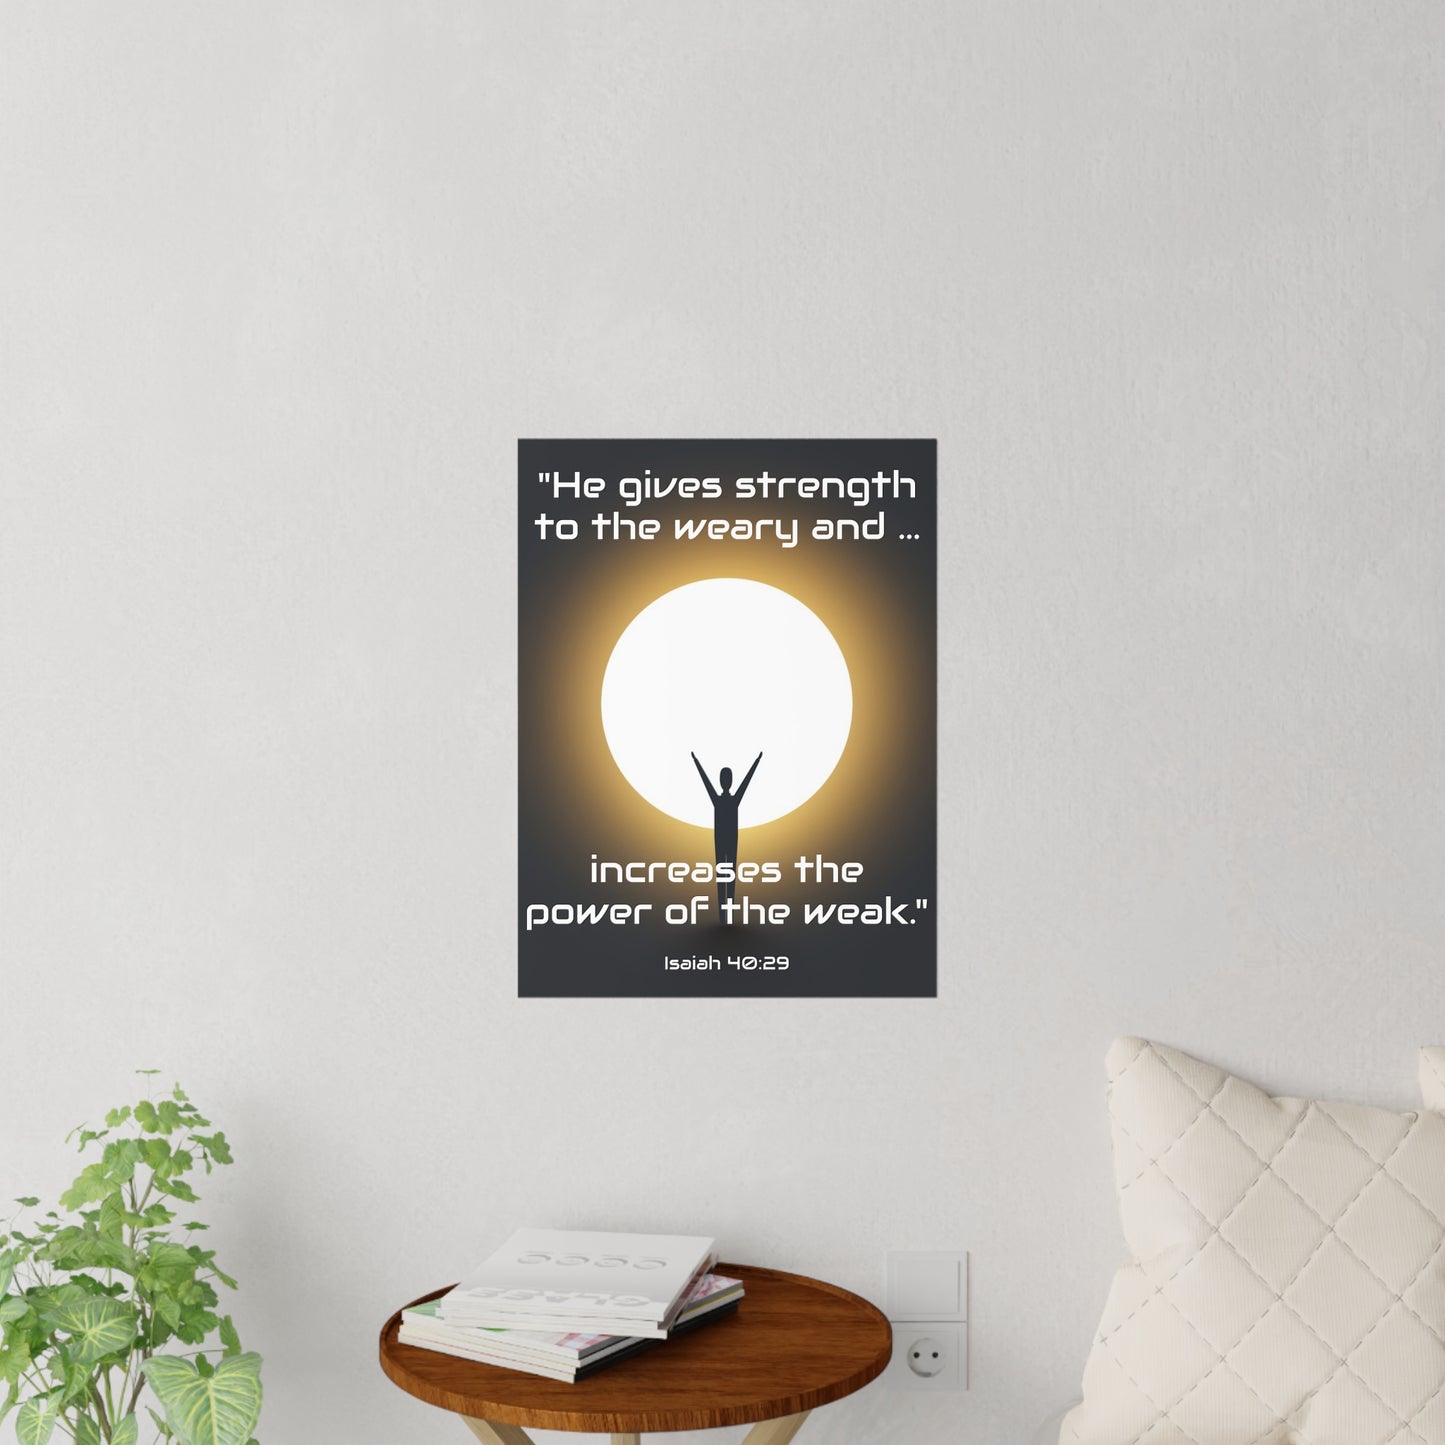 Inspirational Wall Decals for Bedroom - Durable & Repositionable with Bible Verse | Art & Wall Decor,Decor,Home & Living,Indoor,Magnets & Stickers,Posters,Stickers,TikTok